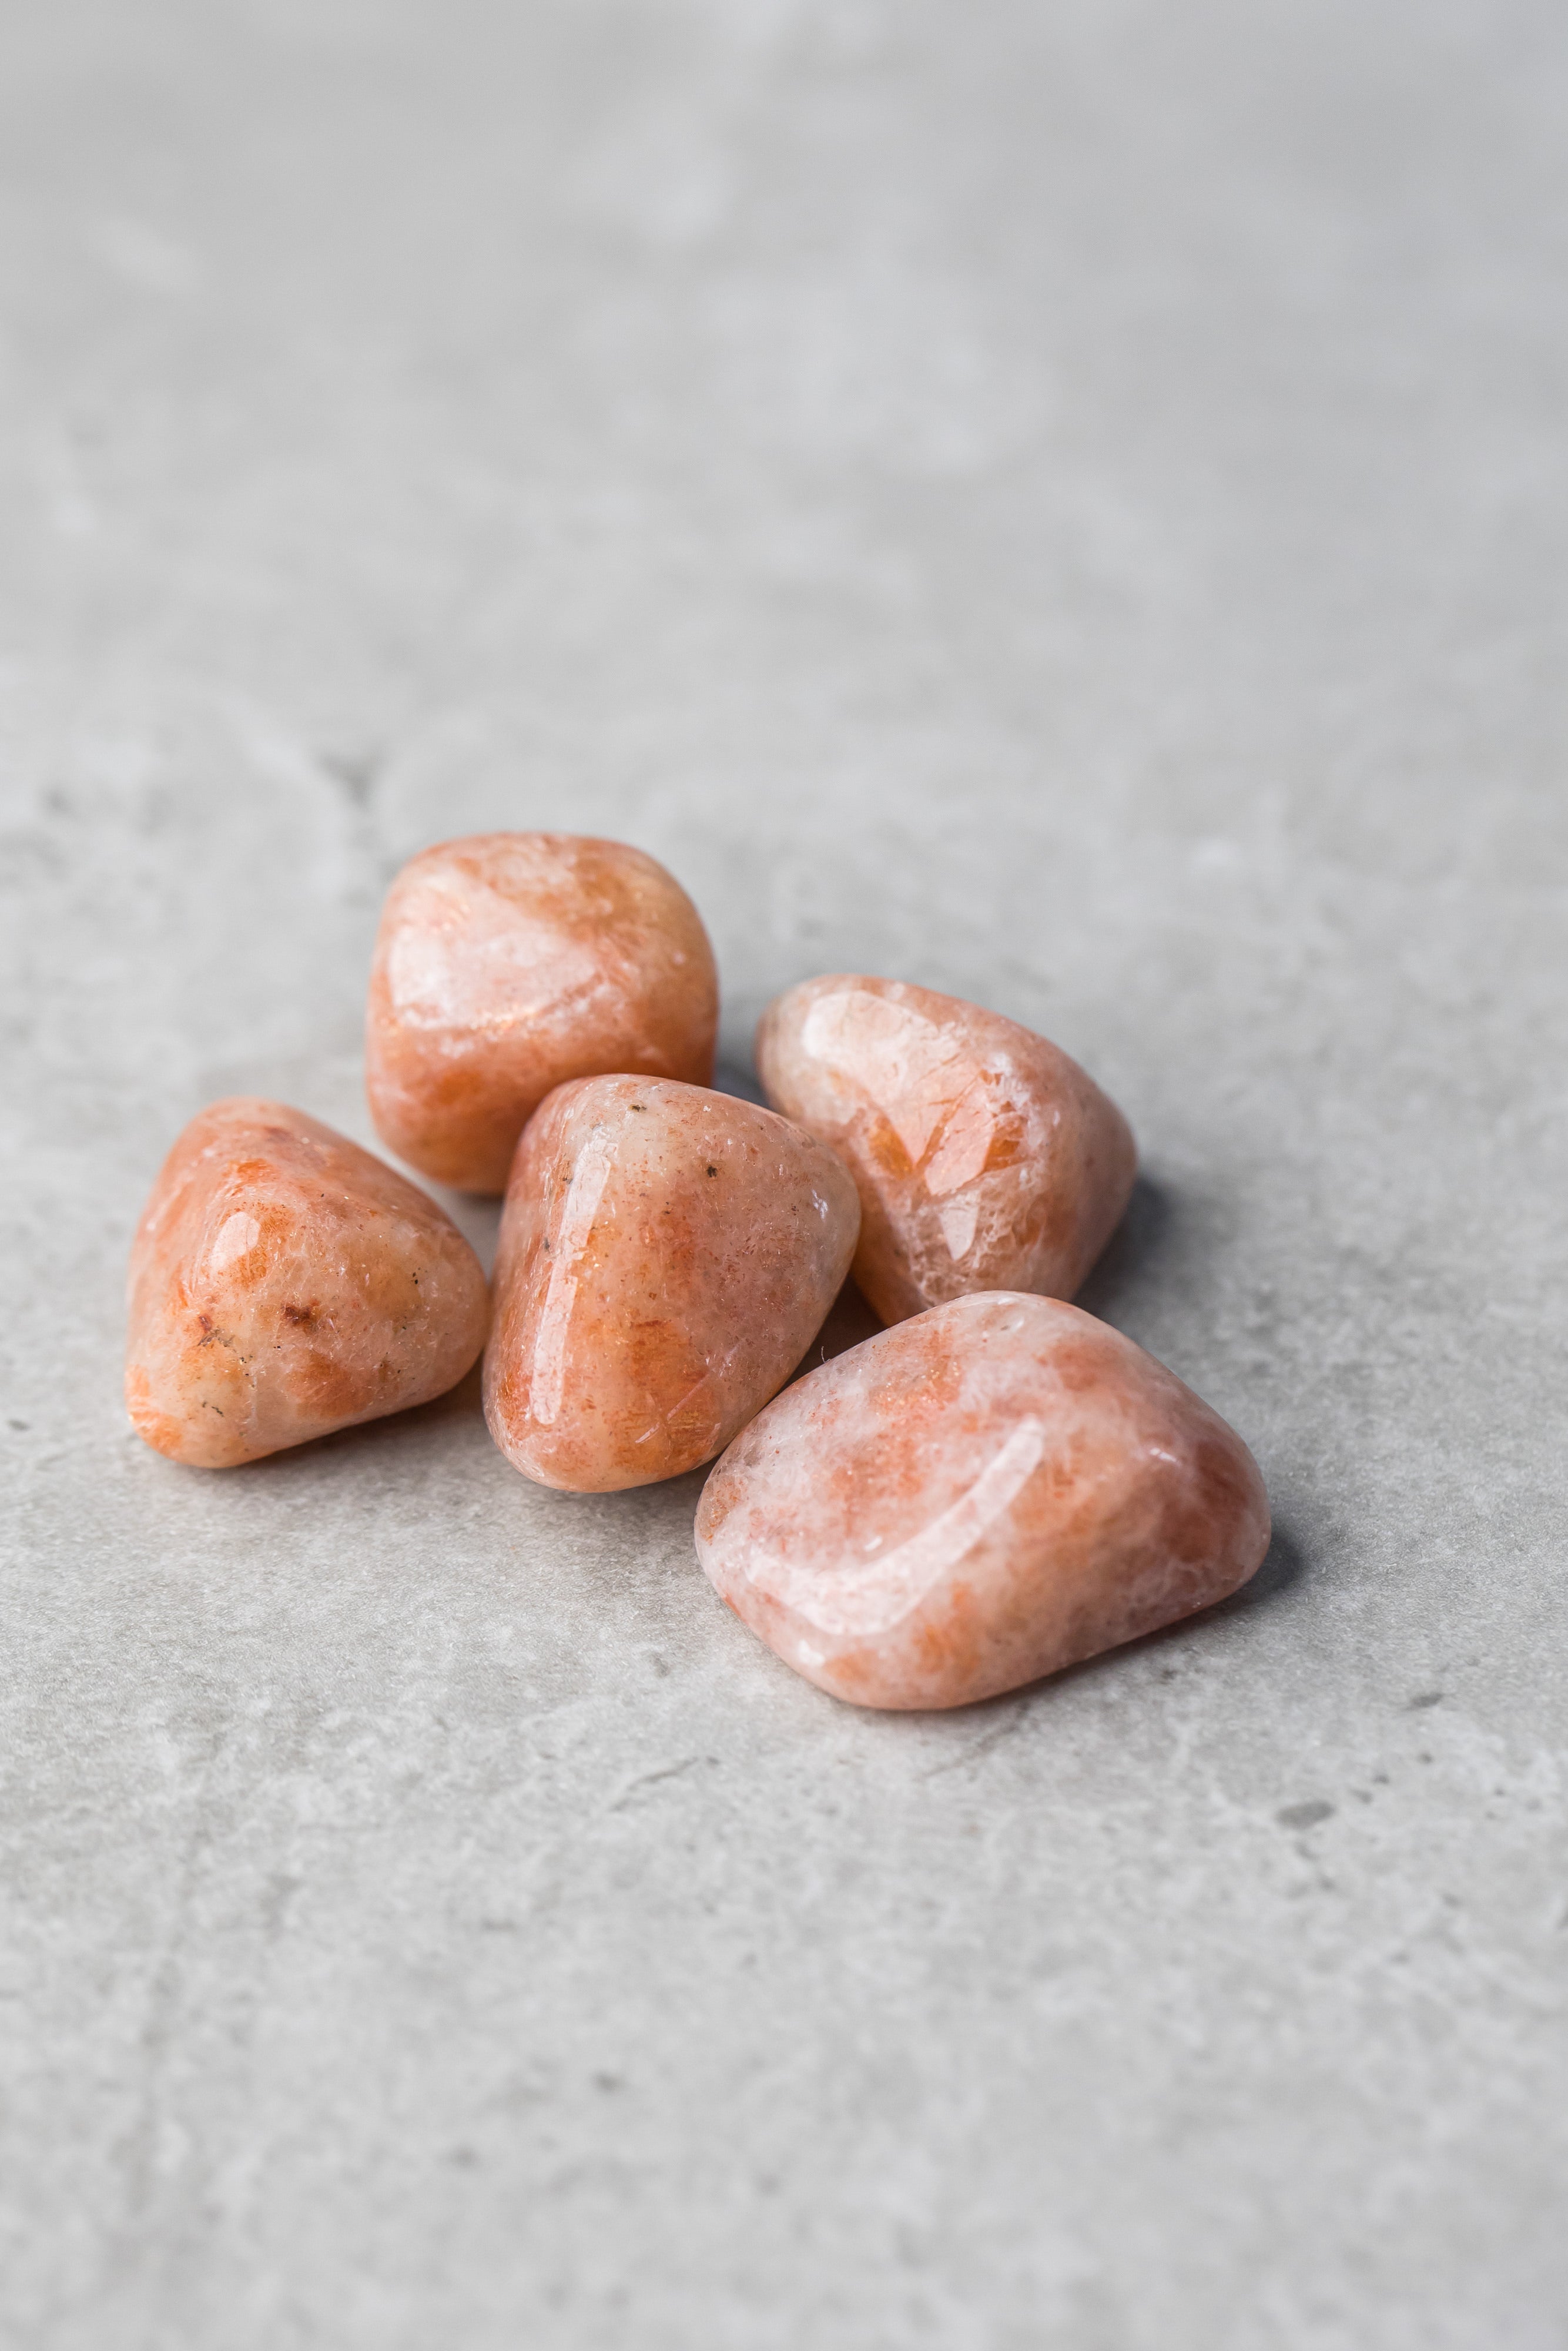 Sunstone - Radiant Crystal for Optimism and Personal Power - Everyday Rocks